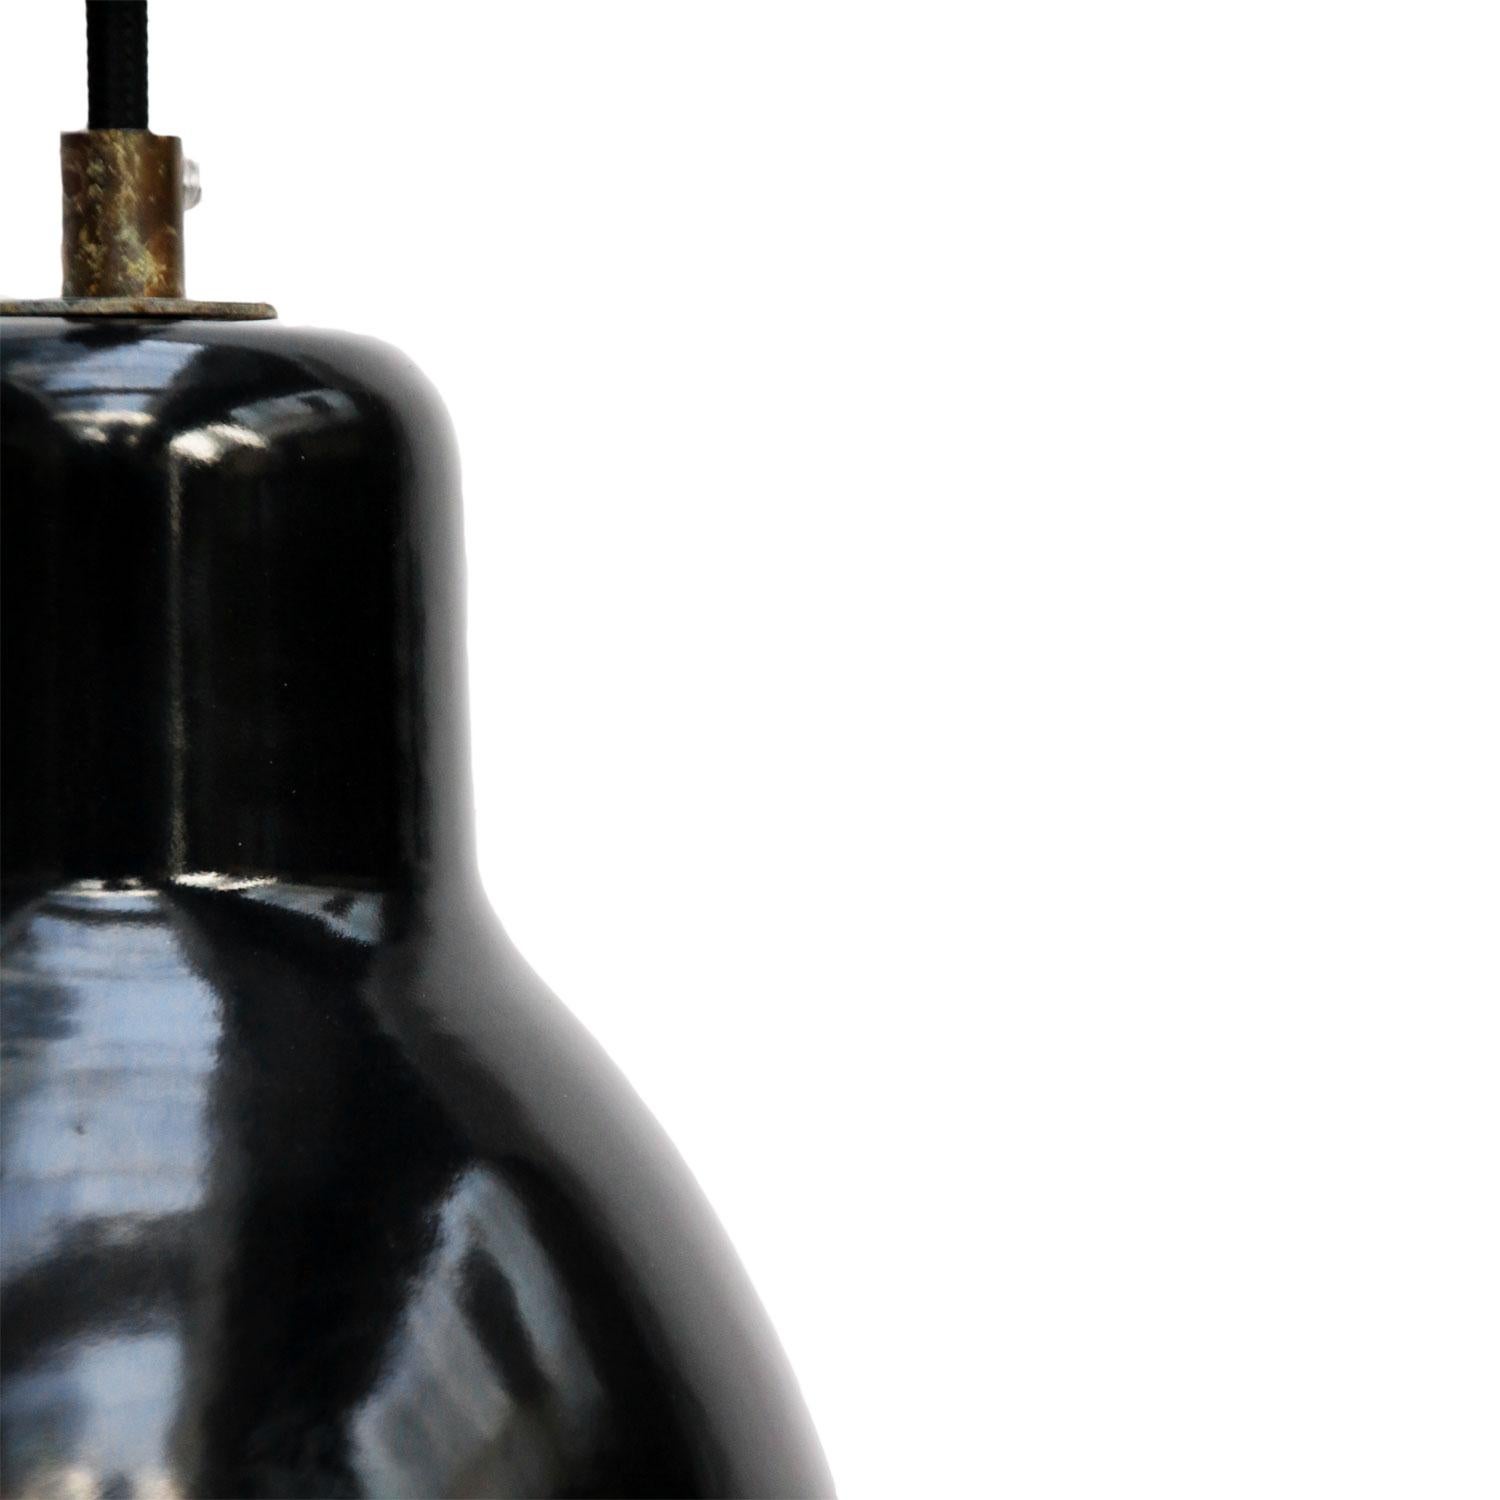 Factory hanging light. Black enamel. White interior.
Brass strain relief with 2 meter wire.  

Measure: Weight: 0.6 kg / 1.3 lb

Priced per individual item. All lamps have been made suitable by international standards for incandescent light